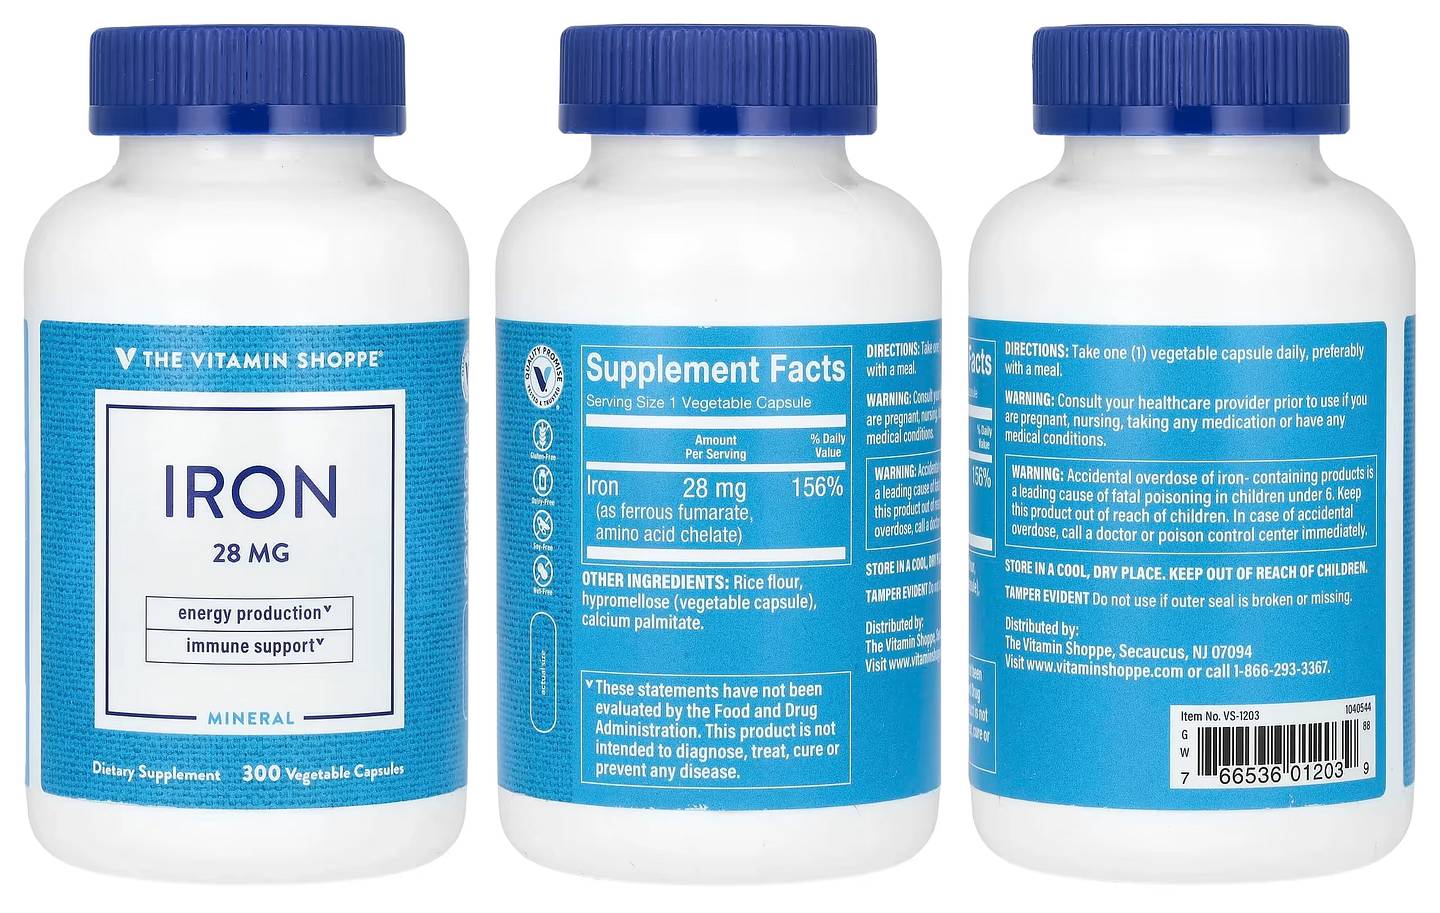 The Vitamin Shoppe, Iron packaging